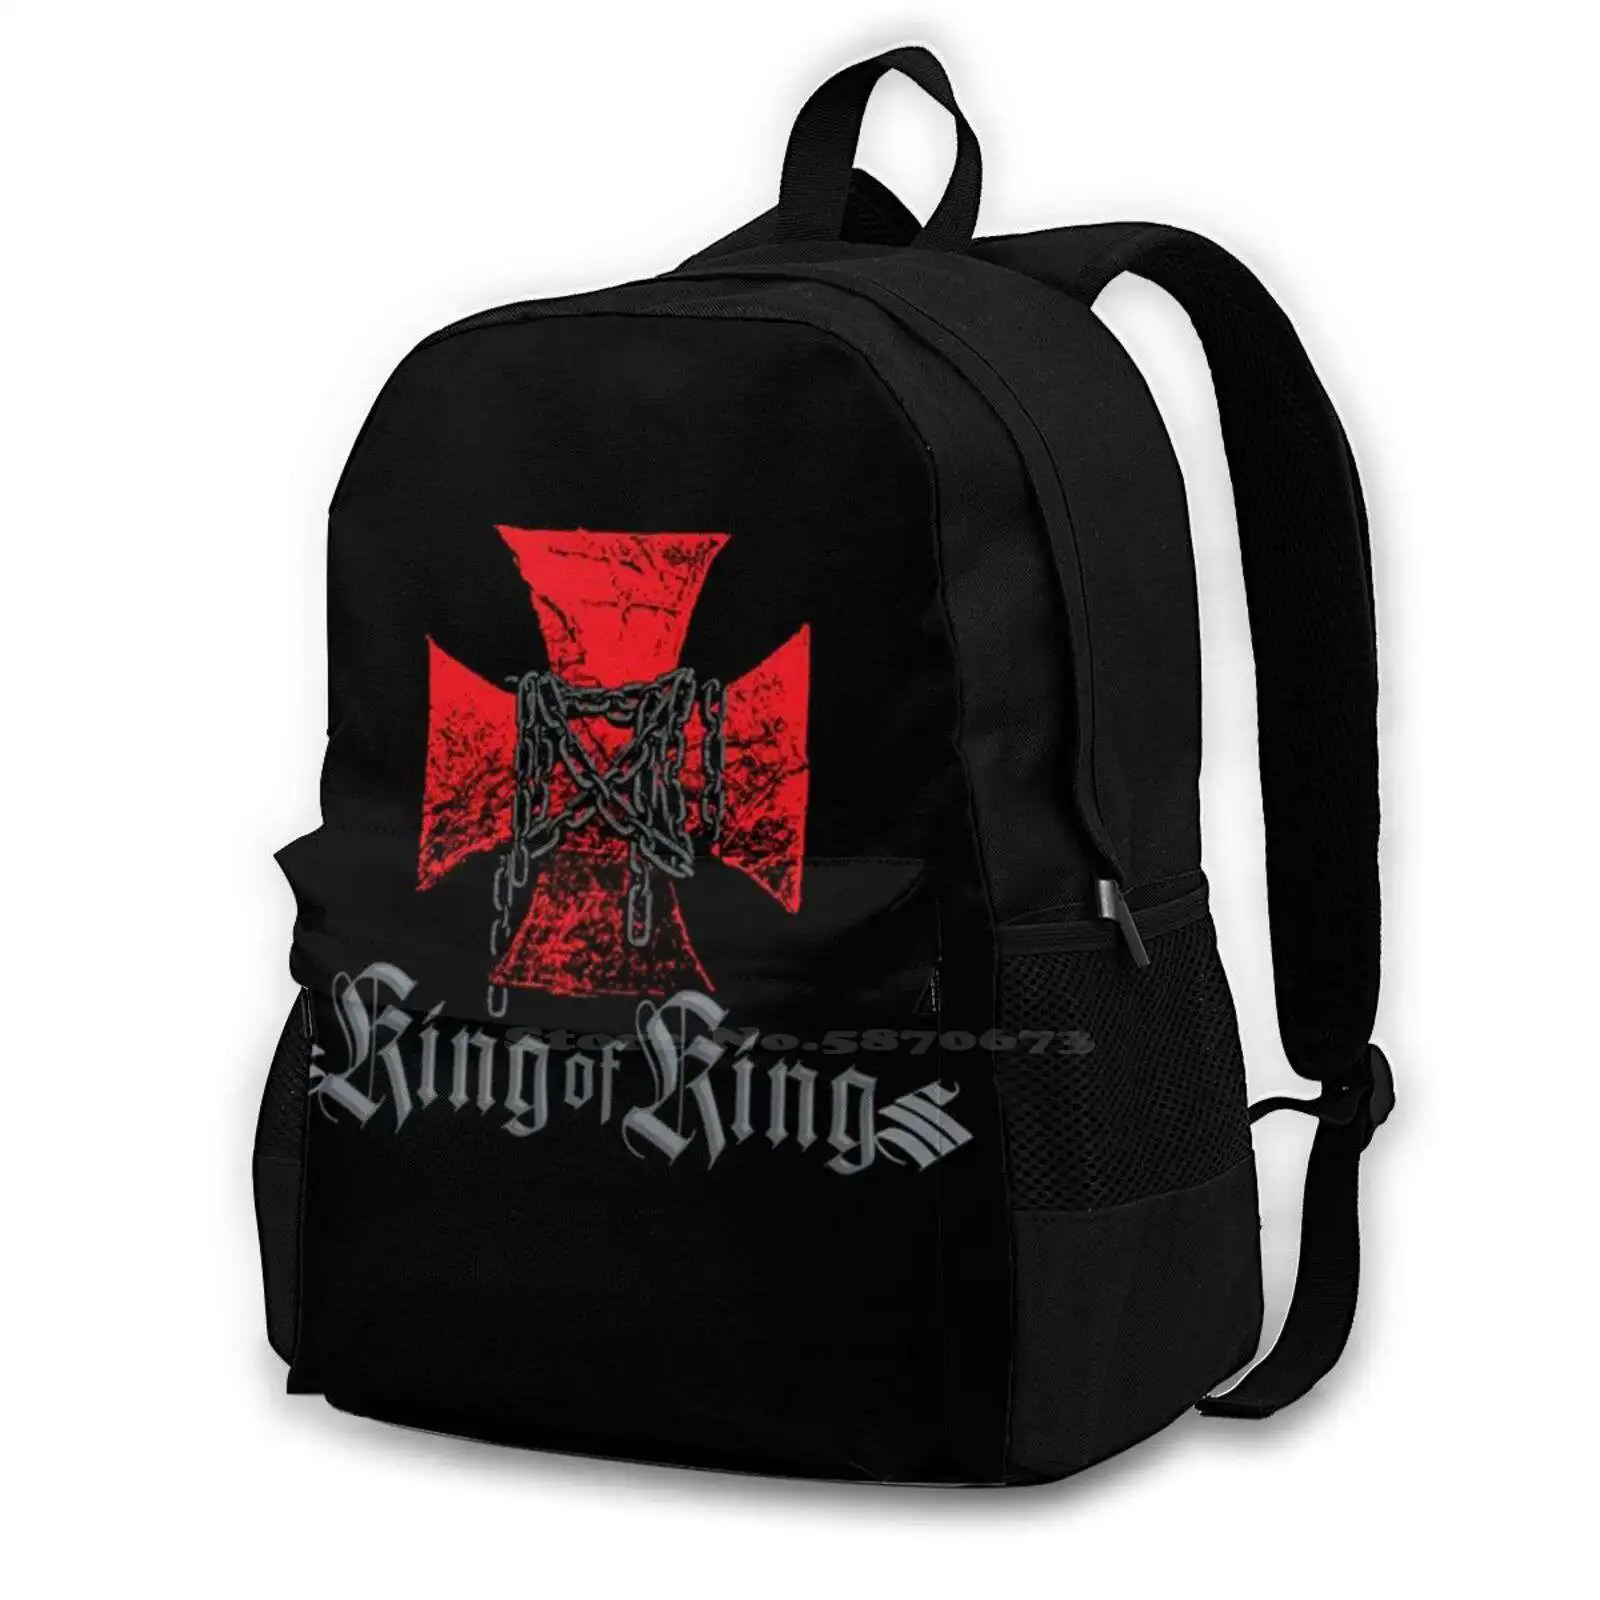 

Prime Edition 09 Bag Backpack For Men Women Girls Teenage Black Stephanie Mcmahon Vince Shane The Game Jean Paul Levesque